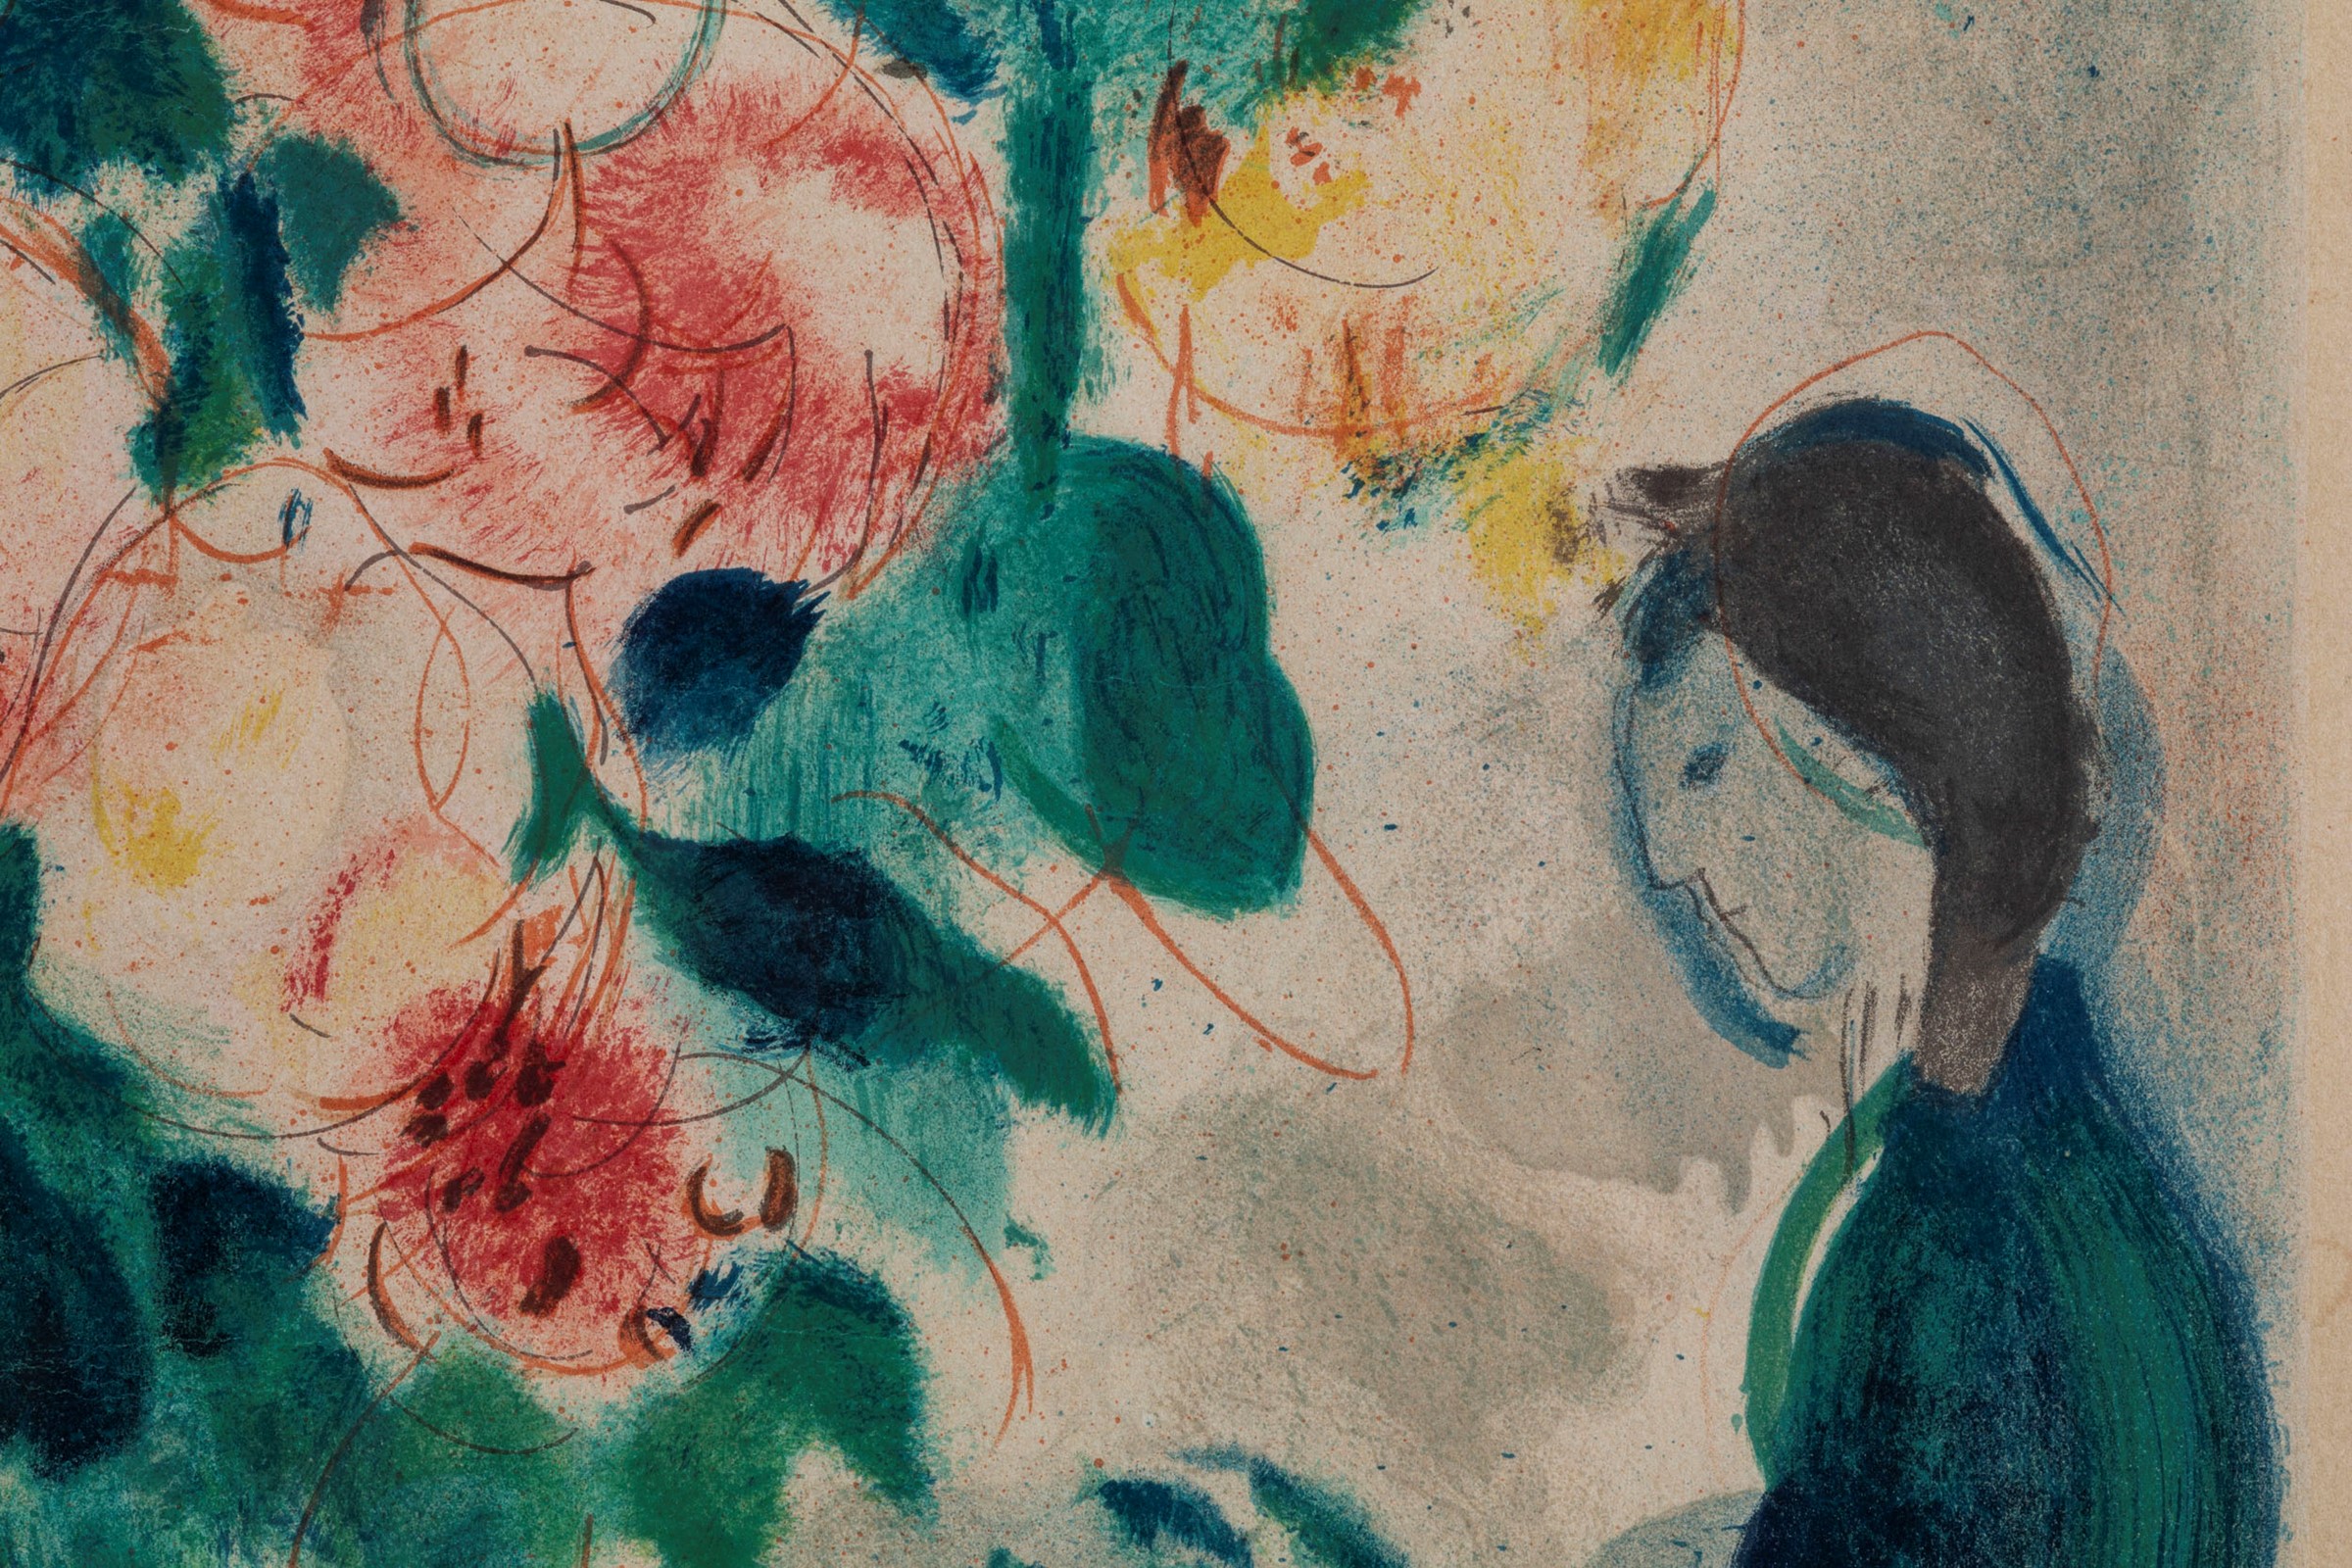 M. Chagall, Le bouquet, 1955 - Image 5 of 5